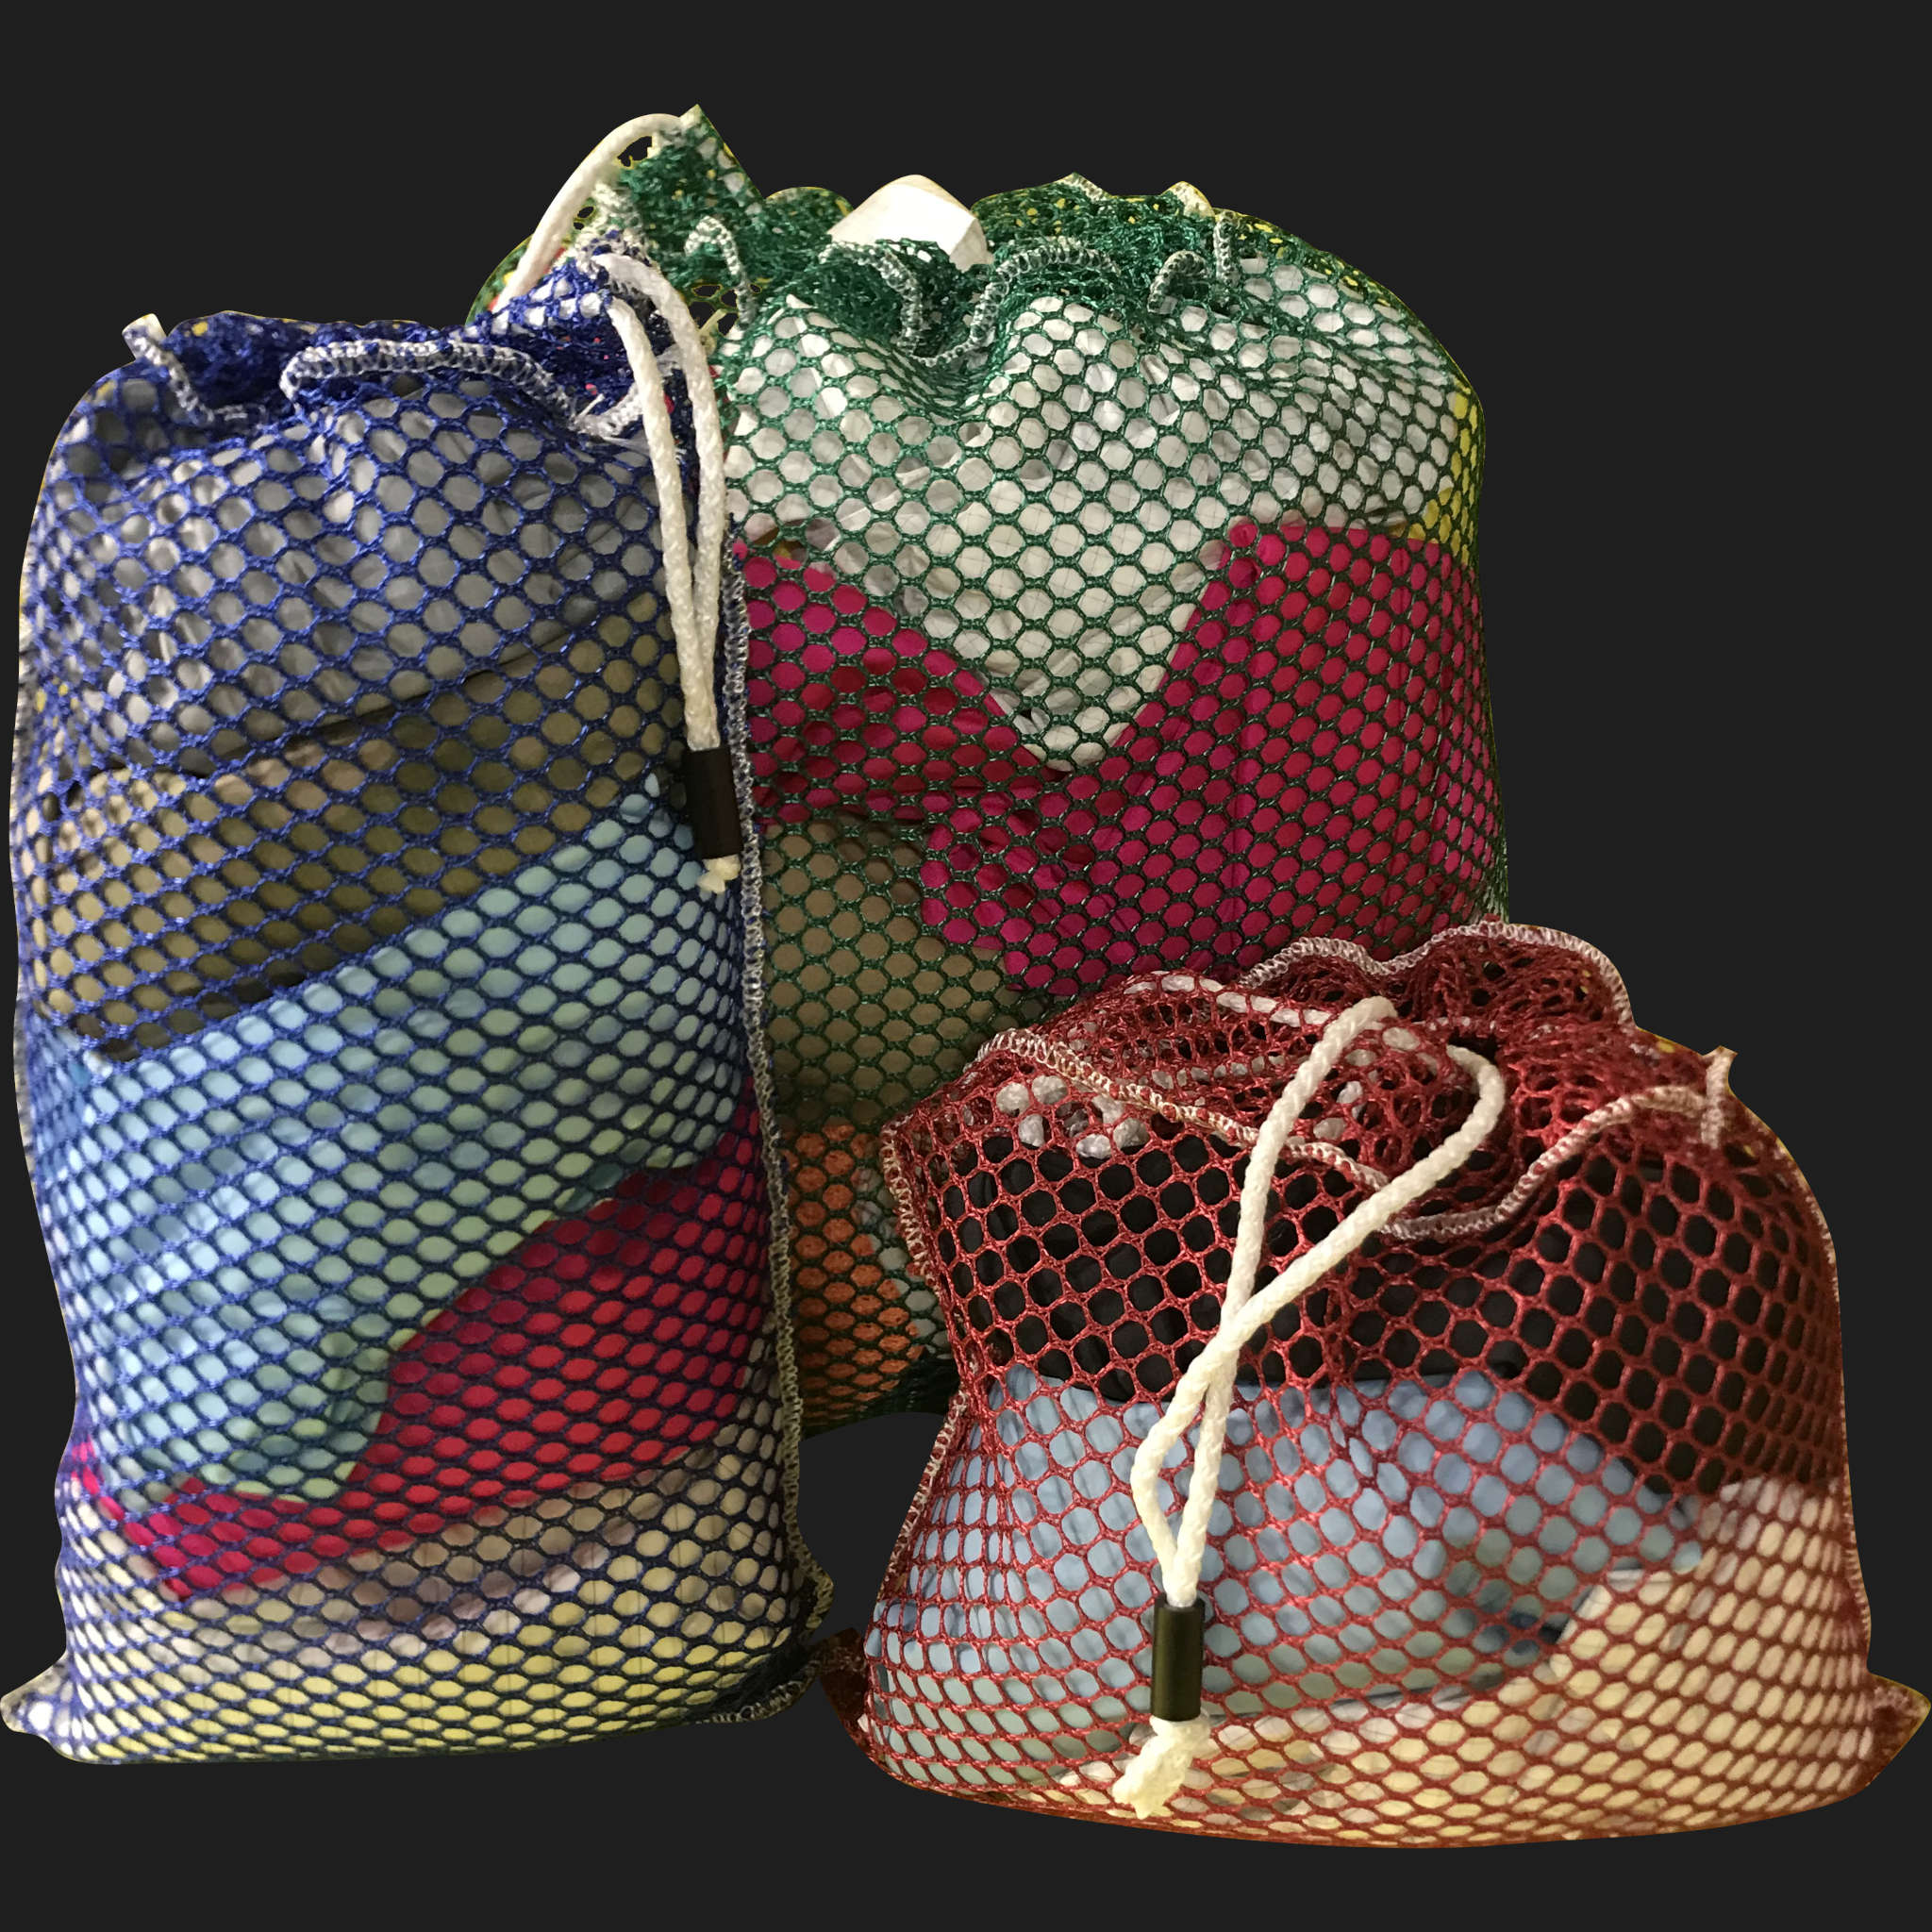 26" x 48" Customized Mesh-Net-Laundry Bags Heavy Duty with Cord and barrellock closure